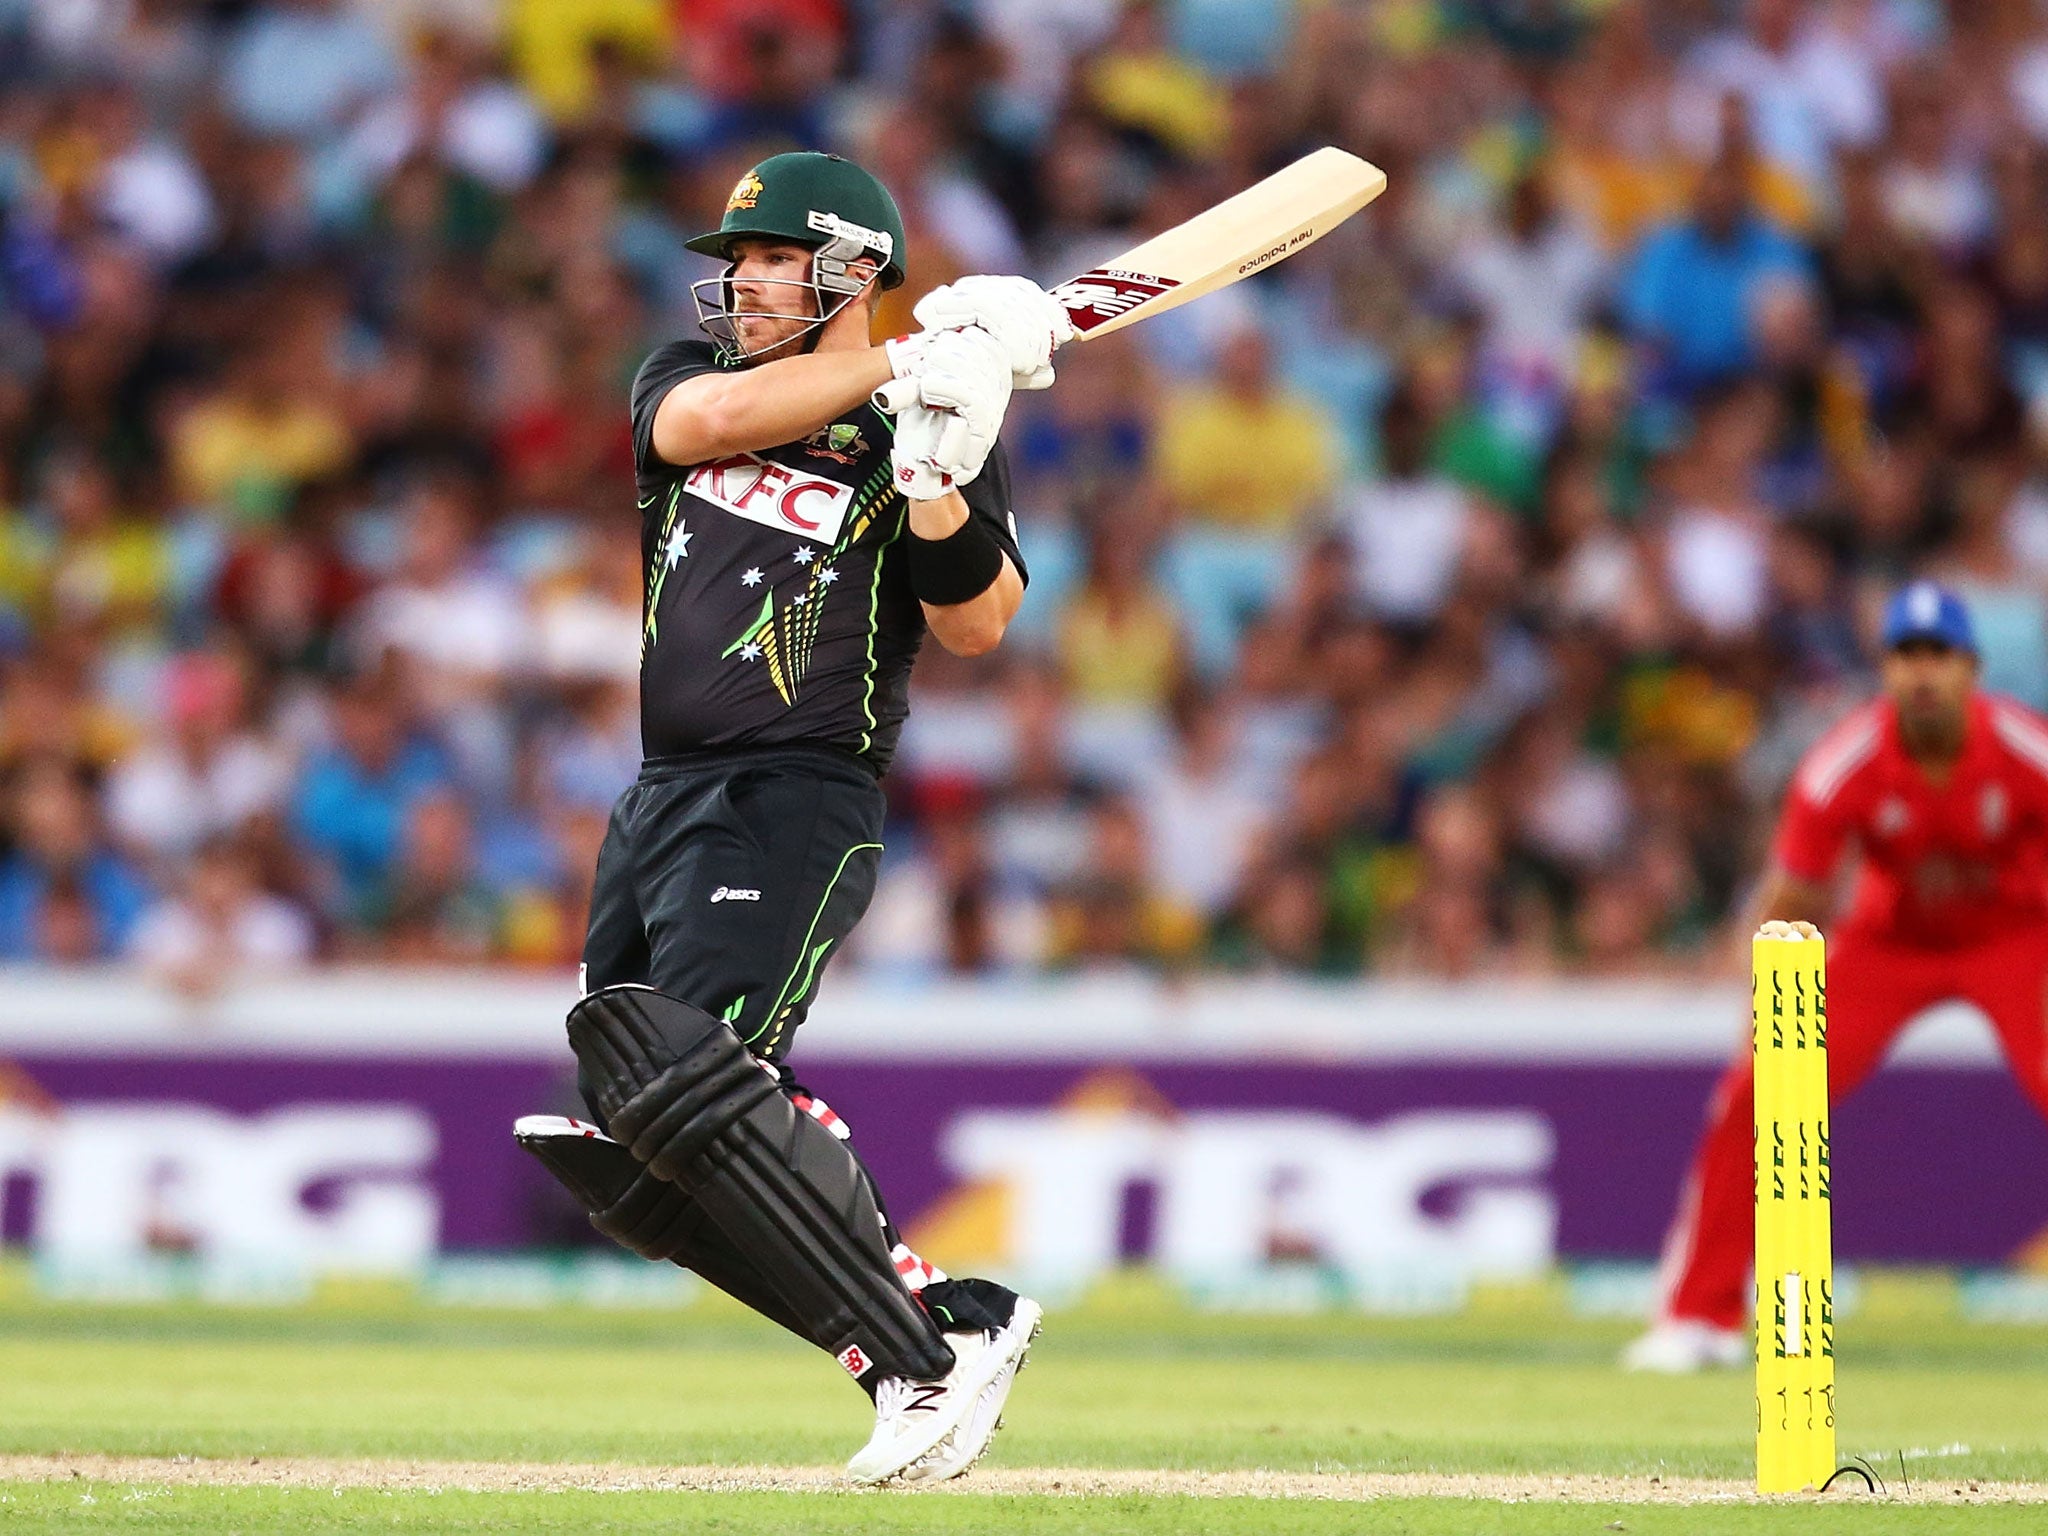 Aaron Finch has joined Yorkshire and will link up with the English county side following the completion of the IPL in May